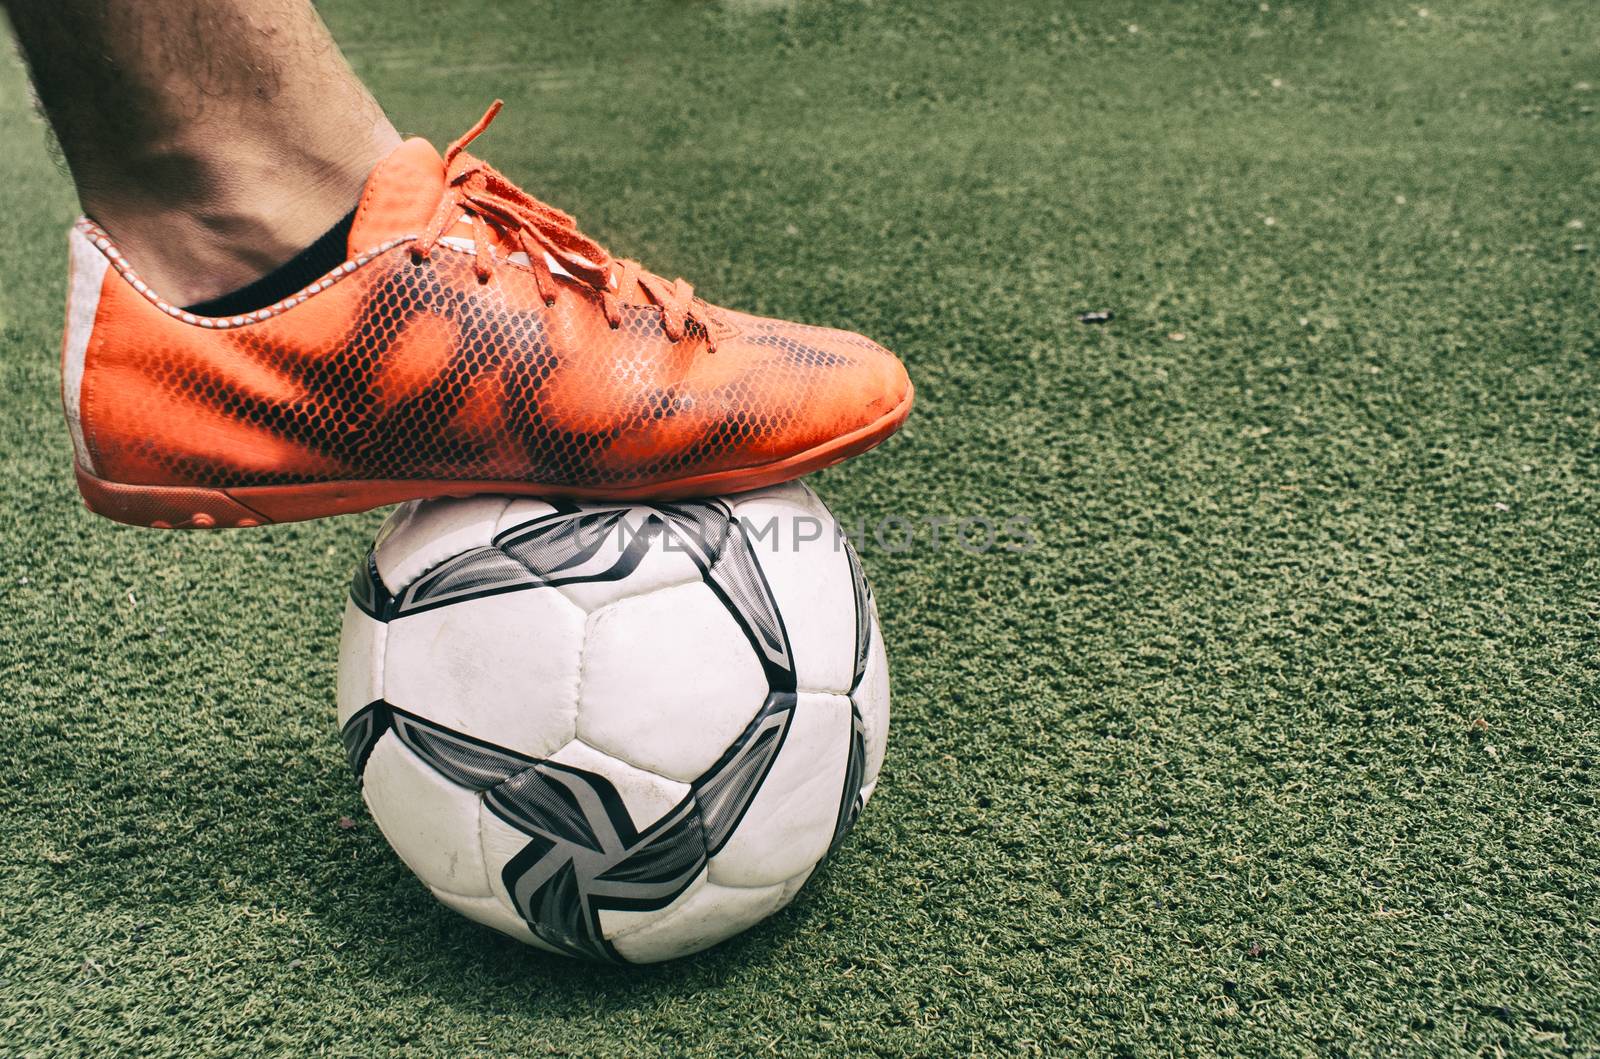 Photograph of a foot and a soccer ball on the grass